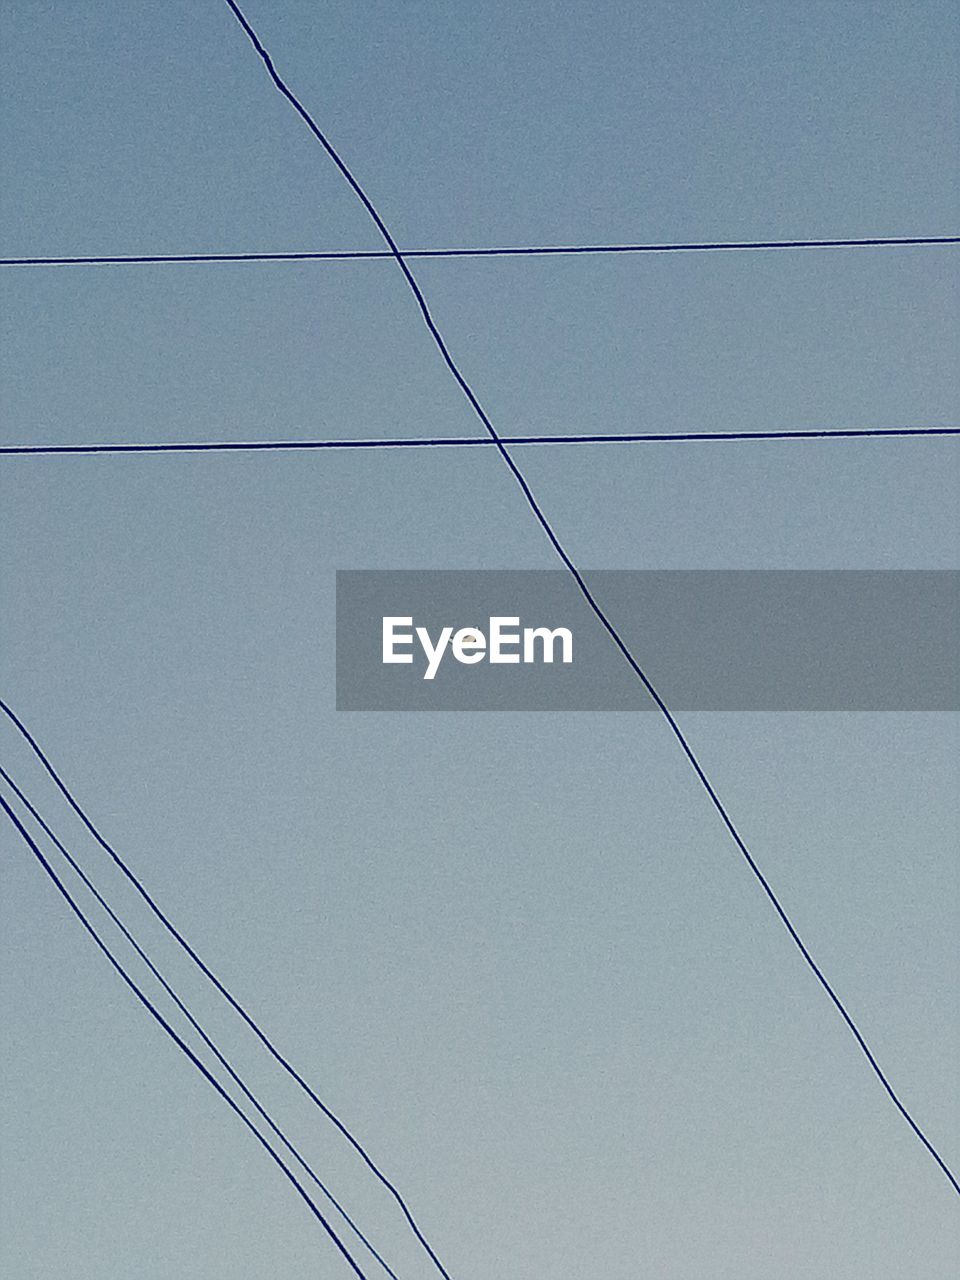 LOW ANGLE VIEW OF TELEPHONE POLE AGAINST SKY